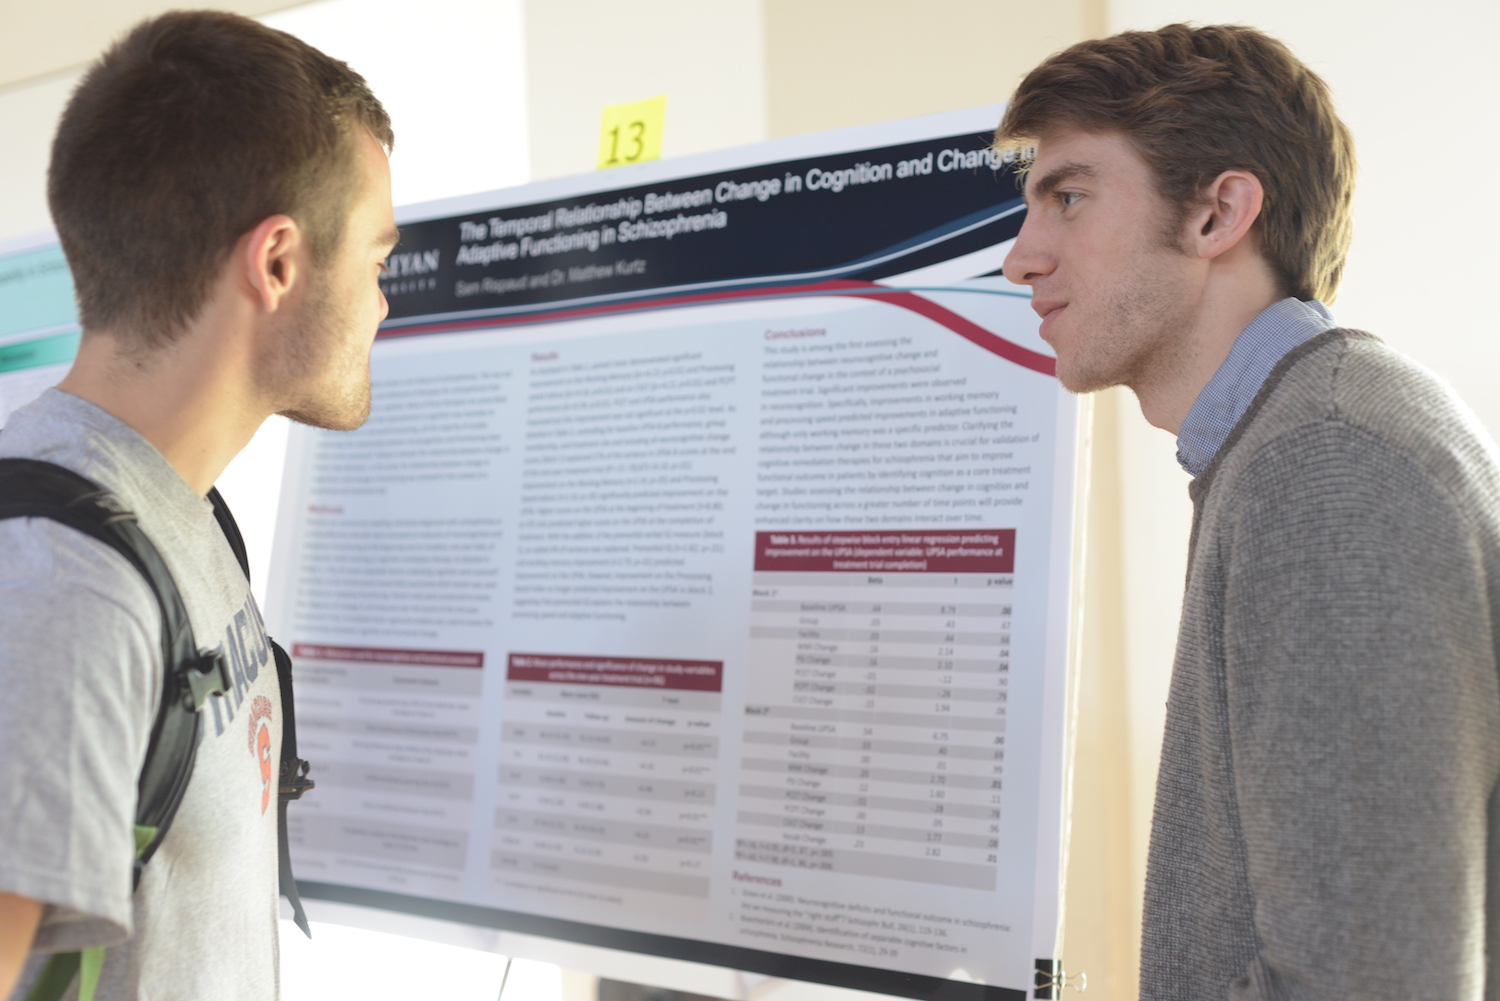 Sam Rispaud '15, right, discusses his research, "The temporal relationship between change in cognition and change in adaptive functioning in schizophrenia," with Patrick Masi-Phelps '15.